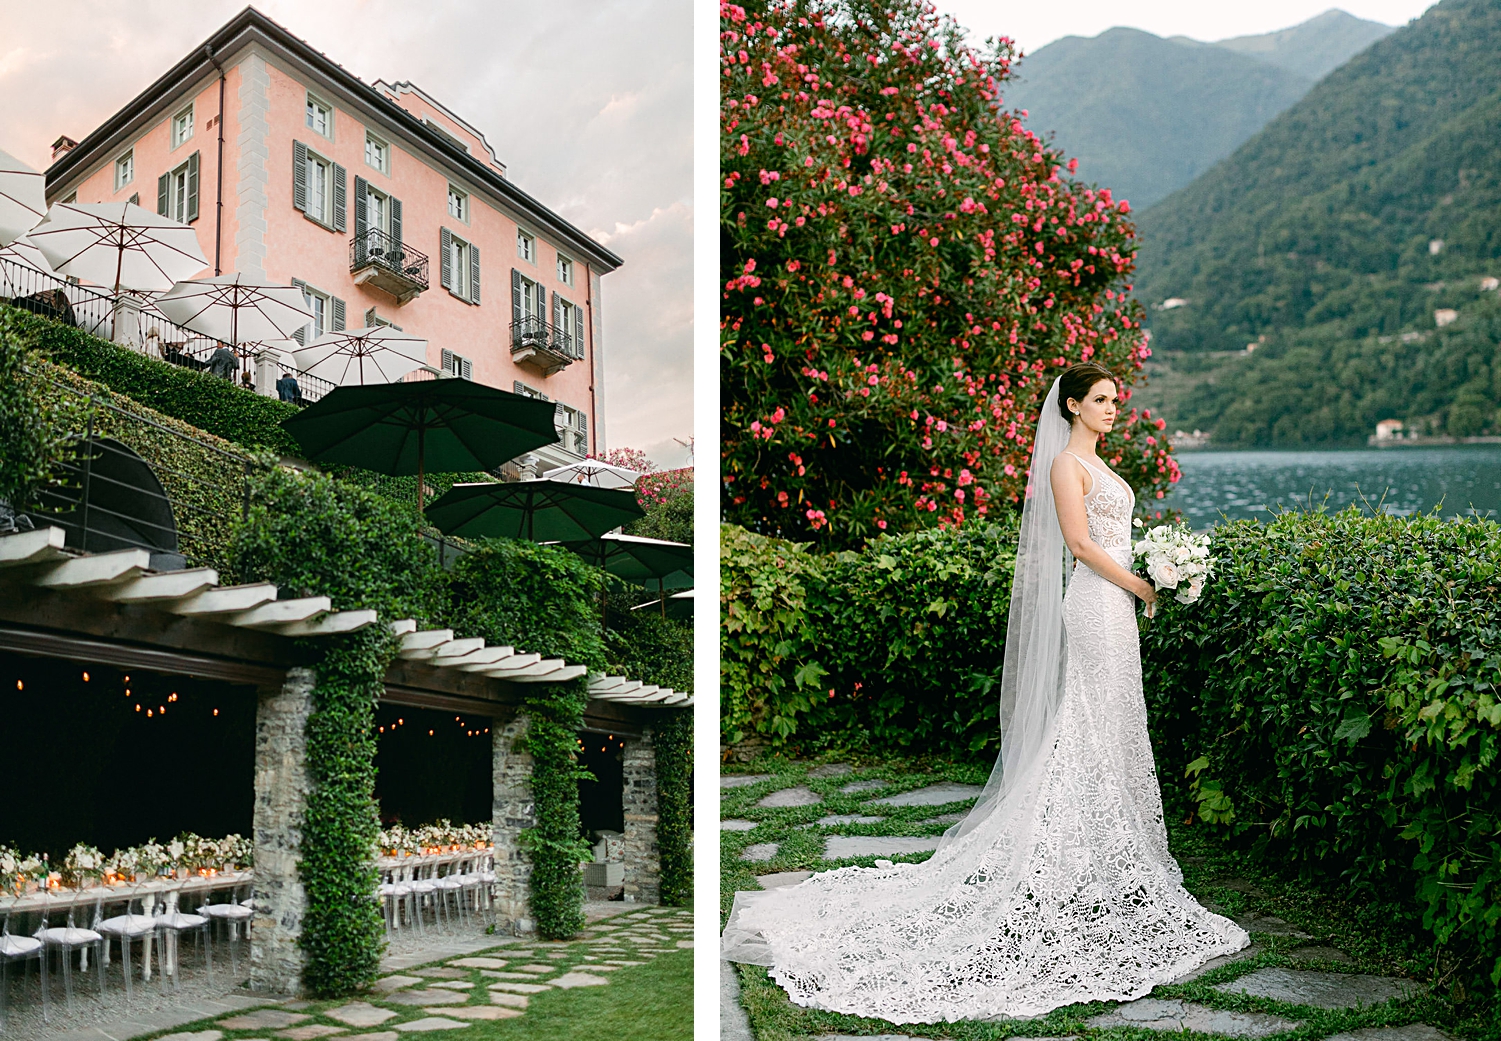 Bride in wedding dress holding bouquet standing by lake Como shore